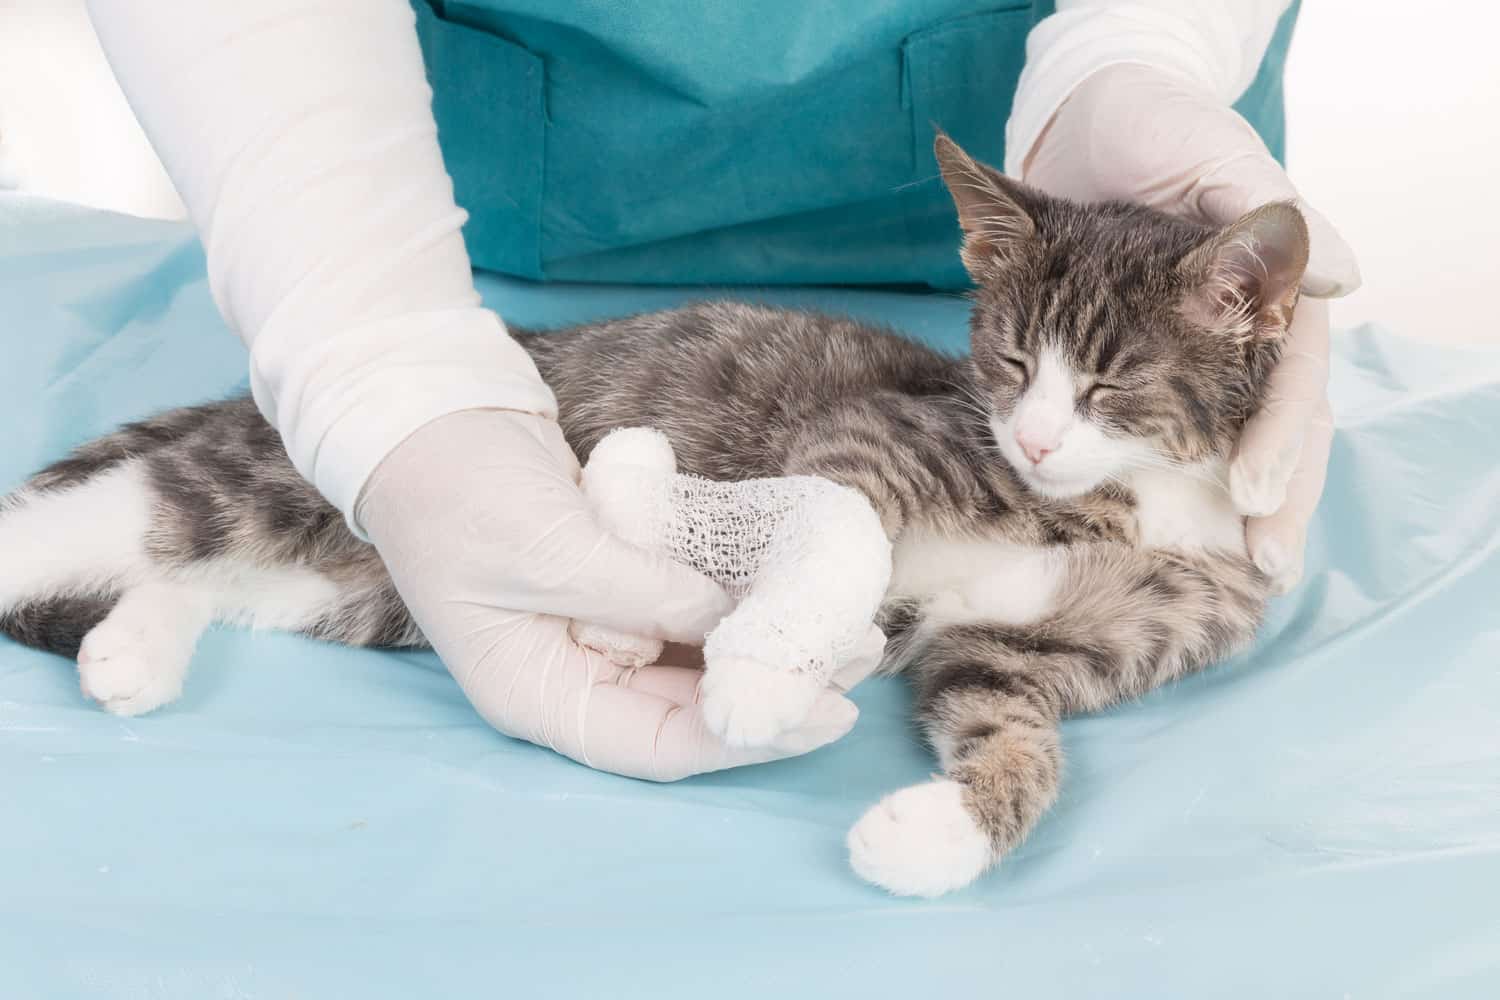 Vet checking the injury of a cat